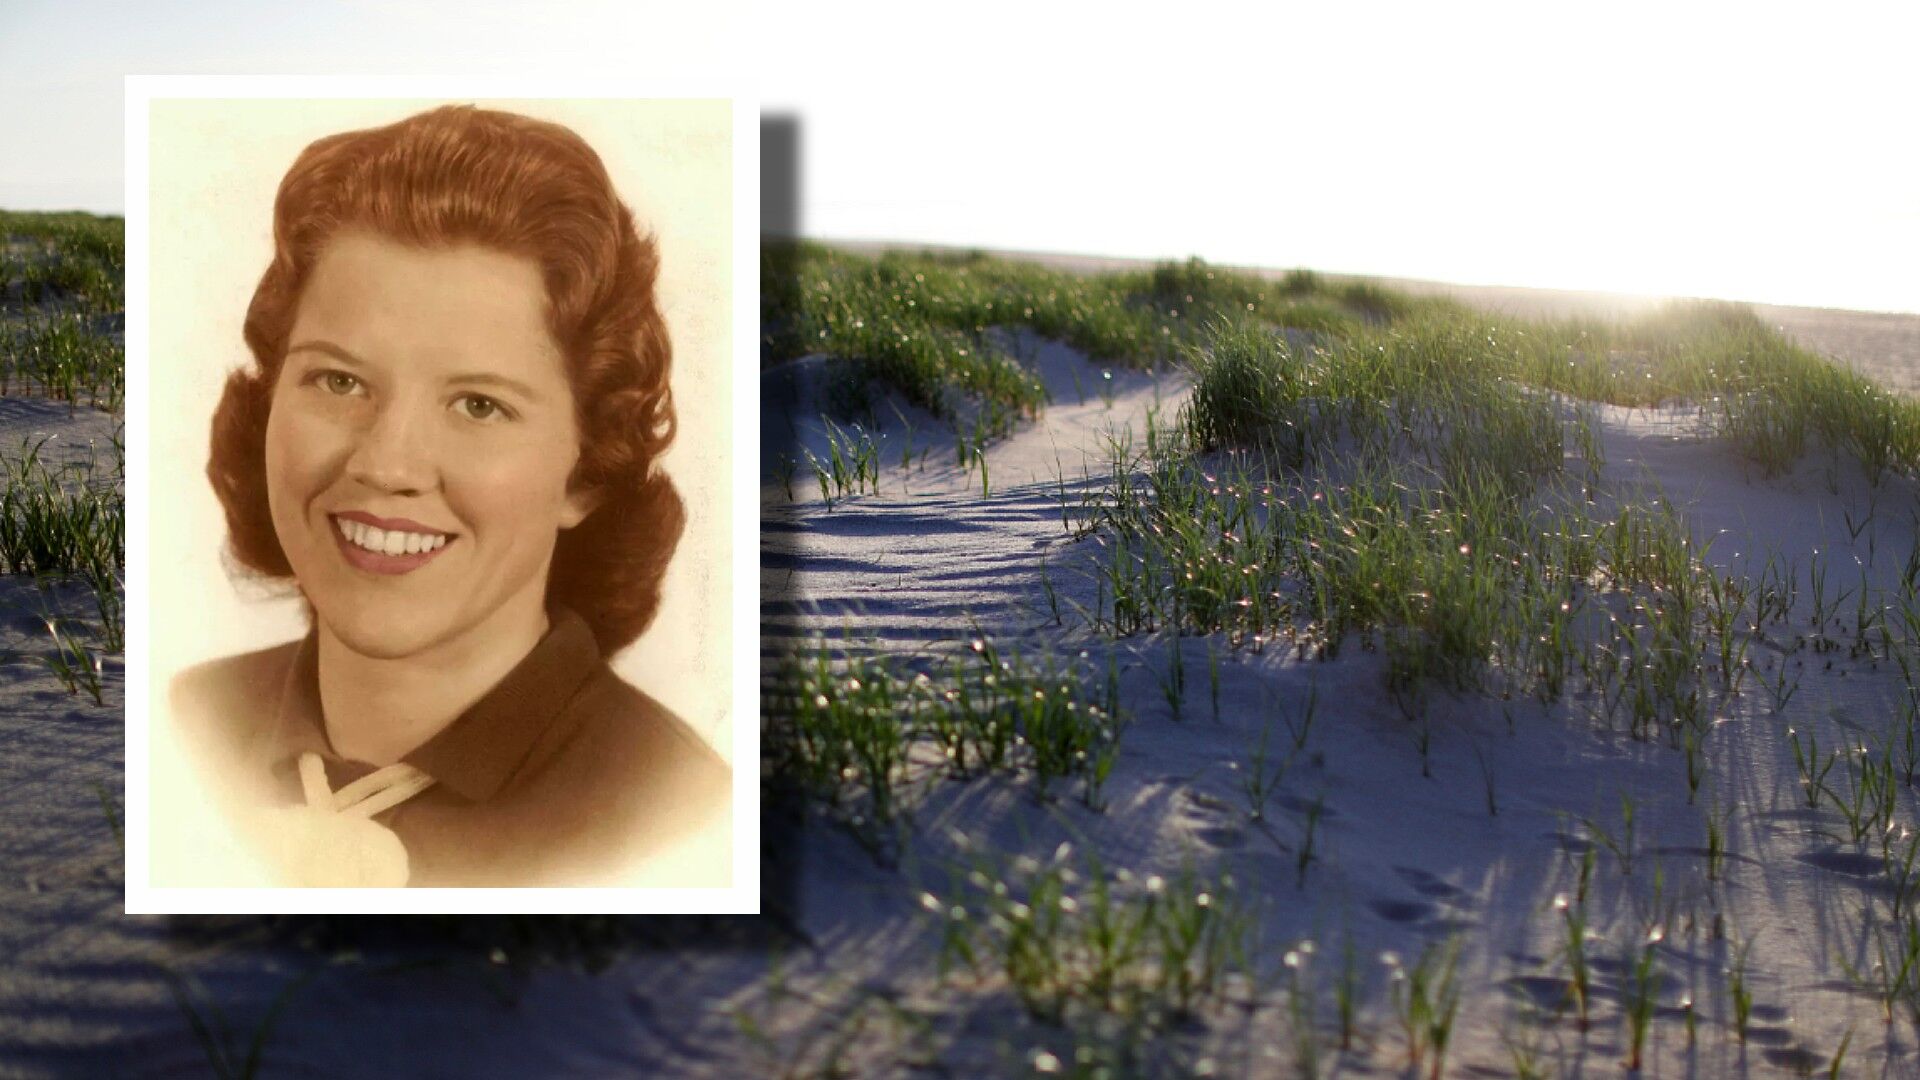 Lady of the Dunes Mutilated woman found on beach in 1974 IDd through genetic genealogy Trending fox23 photo